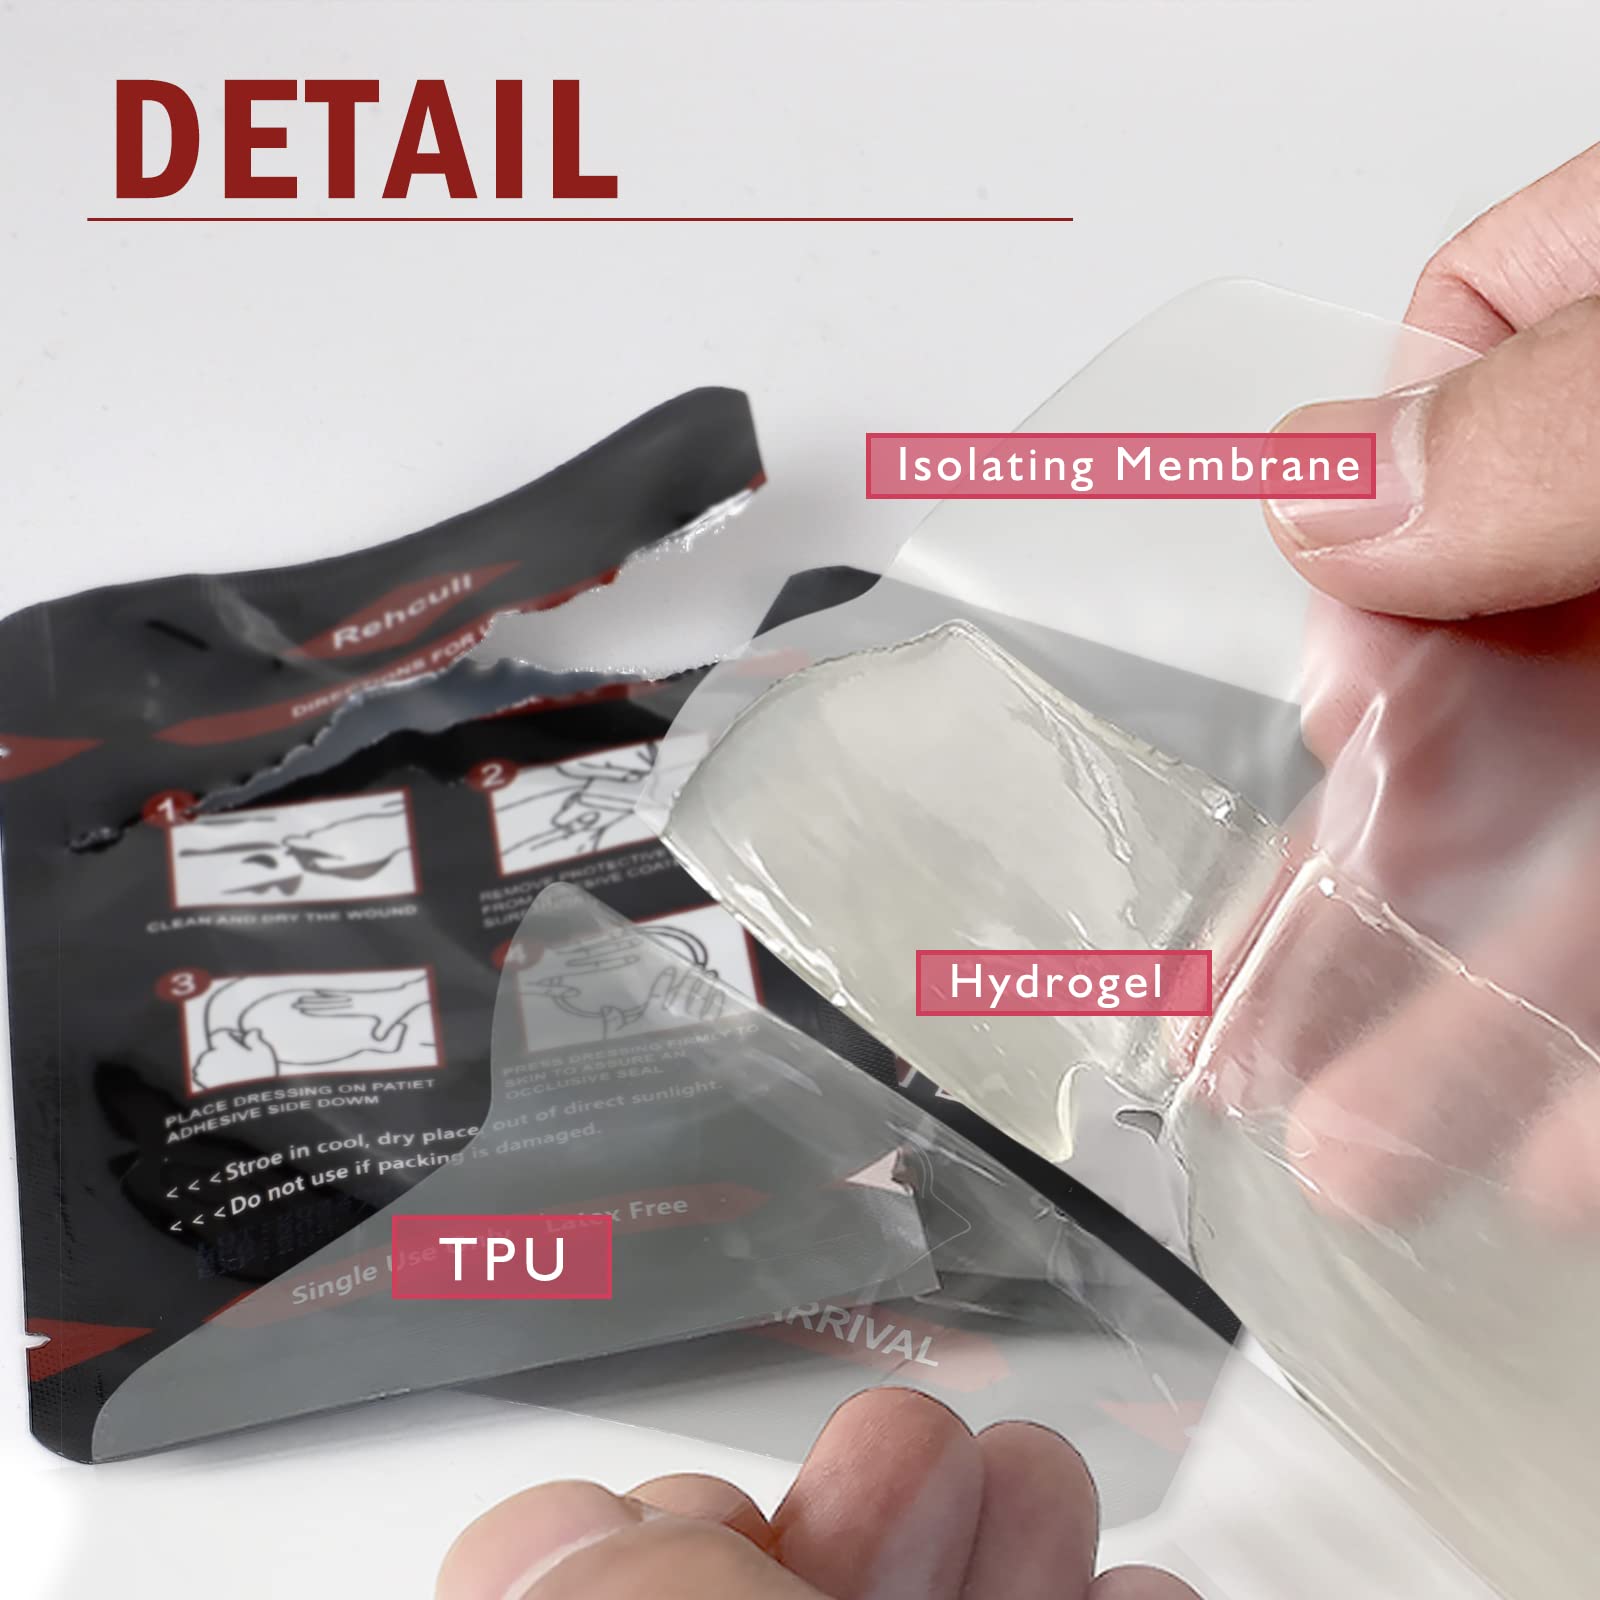 Rehcull Chest Seal, Vented Chest Seals with 4-Vent Channels for Open Chest Injury, Vent IFAK Trauma Kit Dressing Medical Supplies for First Aid Kit, 2 Count